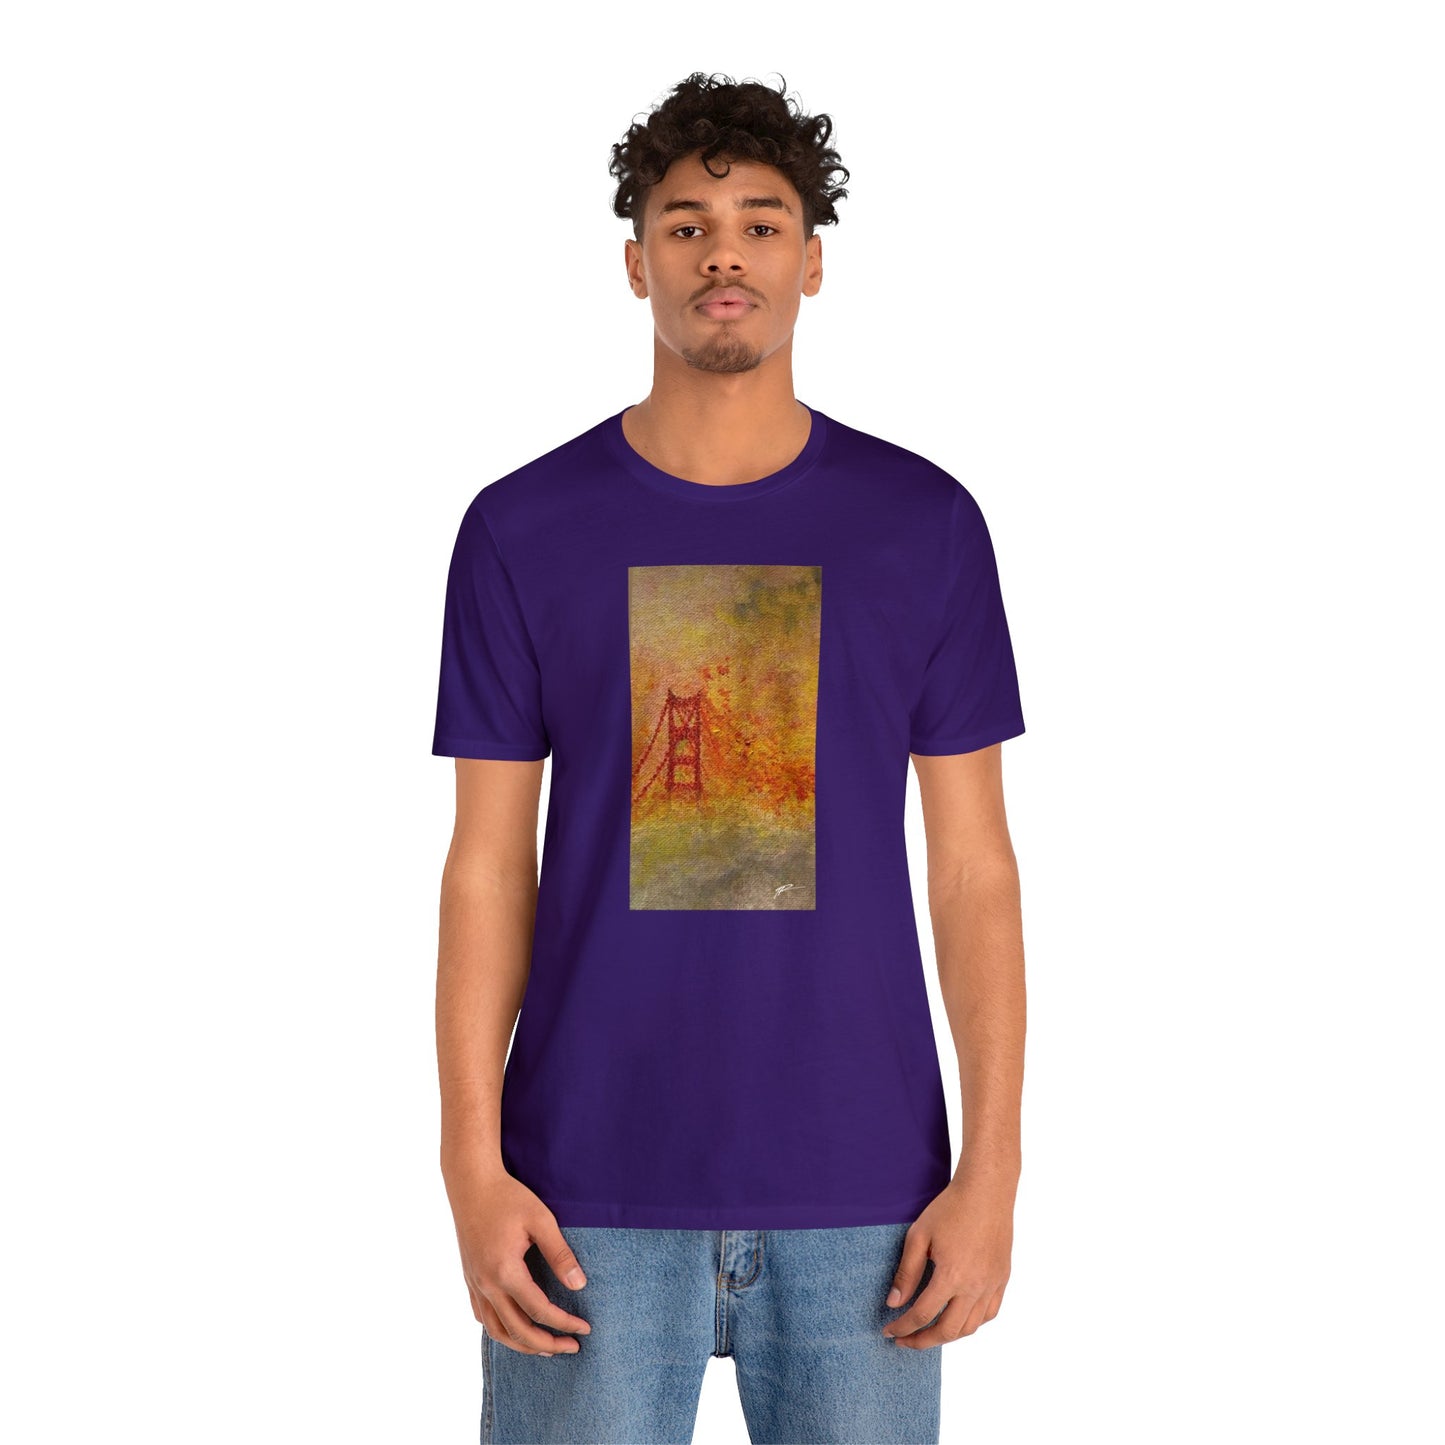 Tipping Points SF Unisex Super Soft Shirt